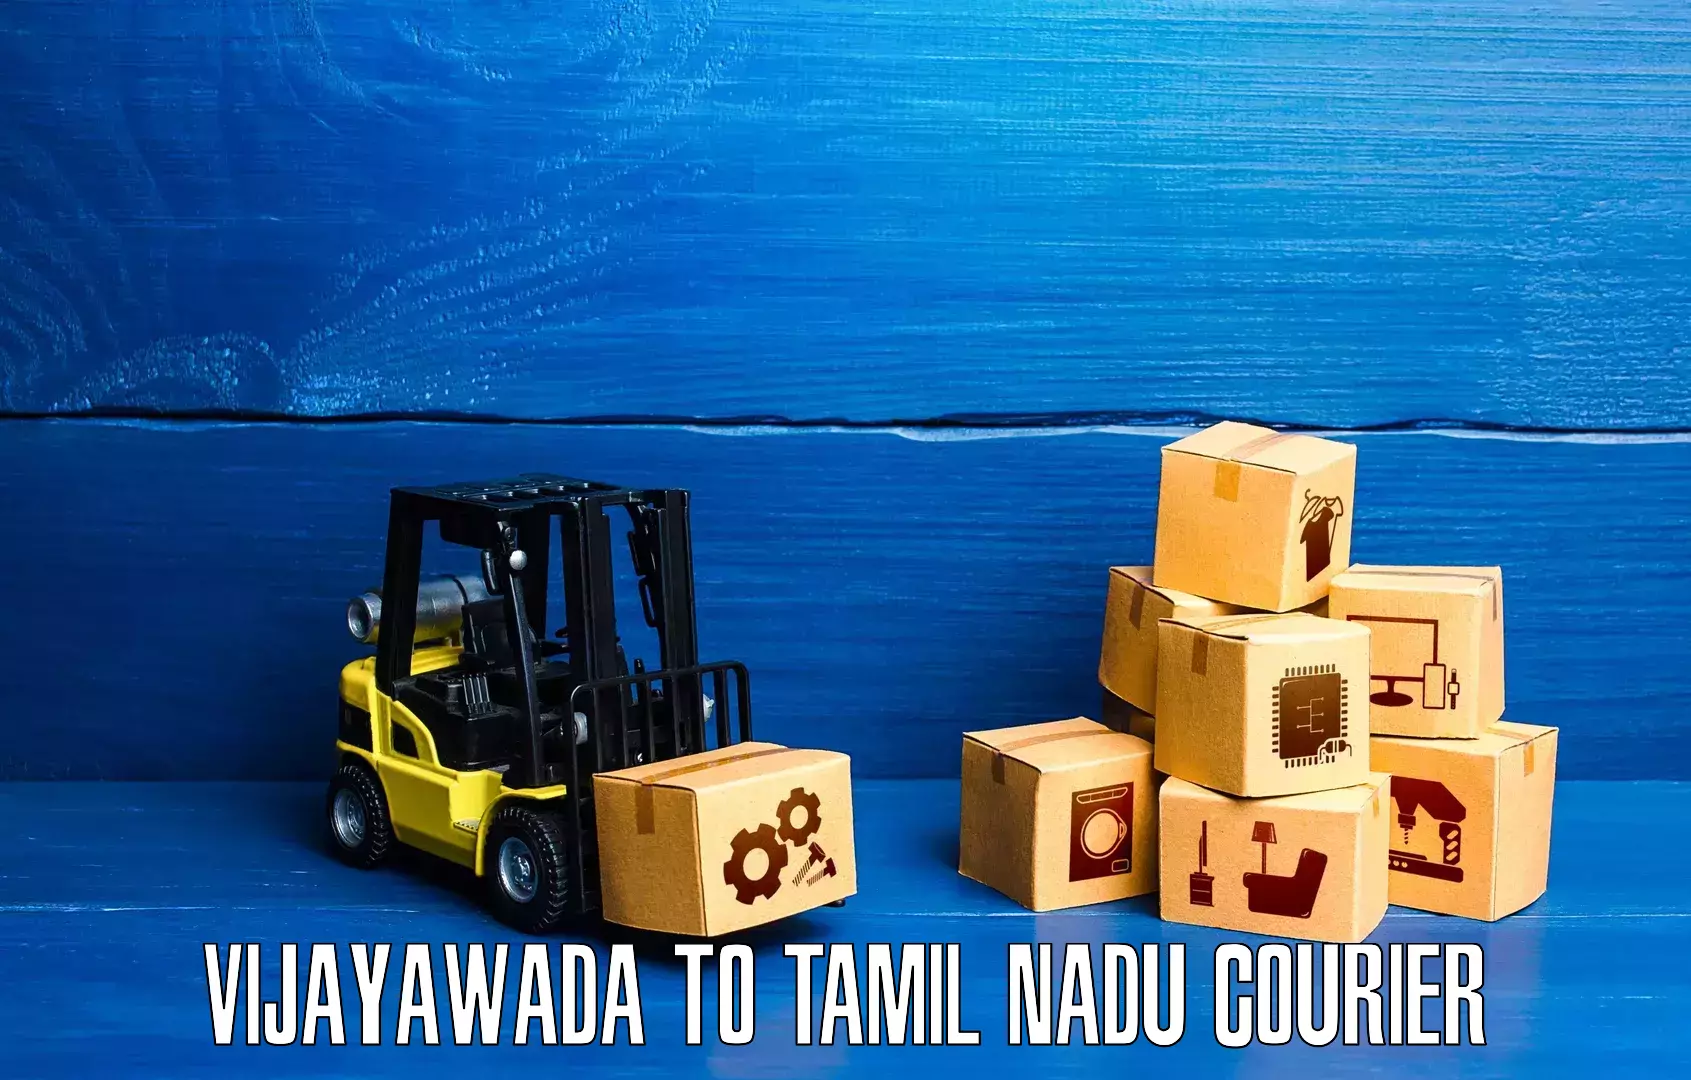 Next day courier Vijayawada to Meenakshi Academy of Higher Education and Research Chennai